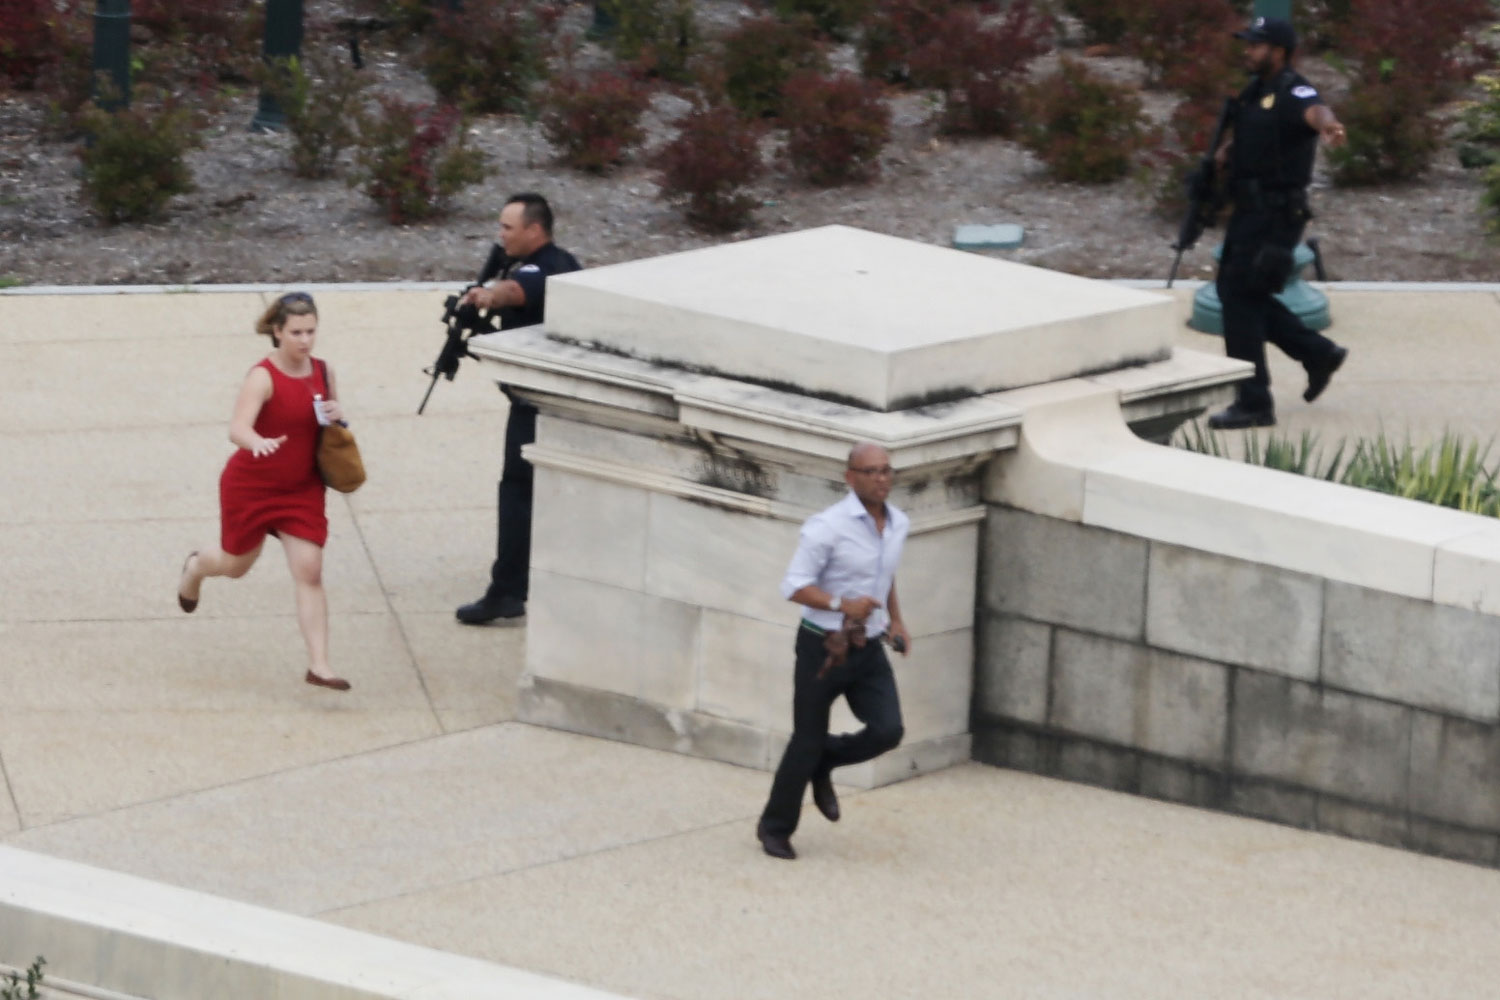 U.S. Capitol On Lockdown After Reports Of Gun Shots